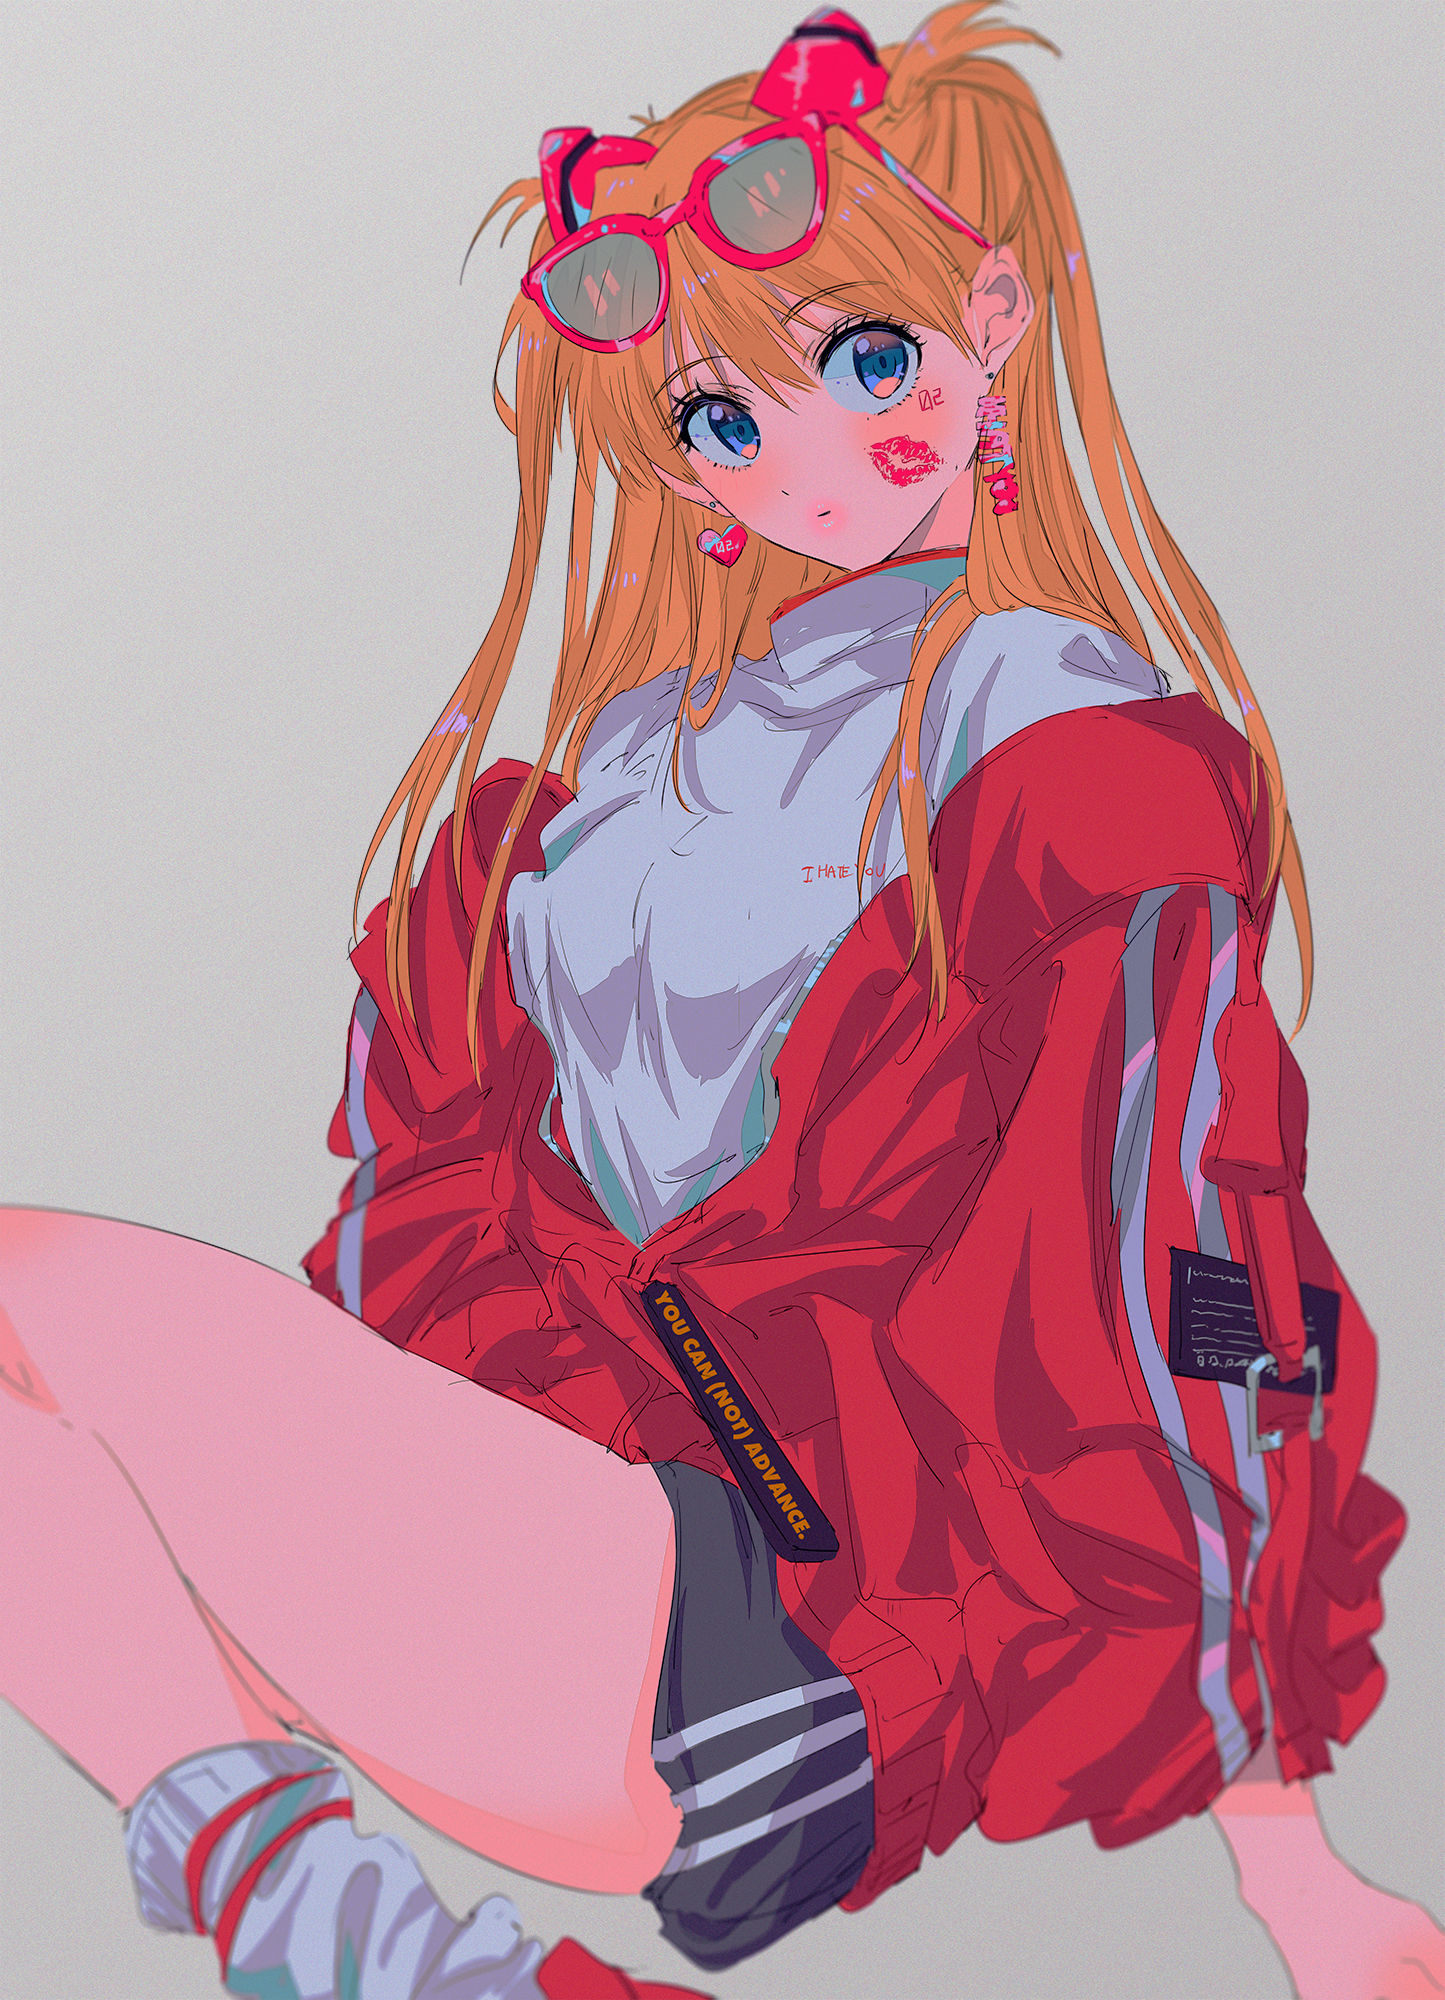 Anime 1445x2000 Neon Genesis Evangelion anime girls Asuka Langley Soryu 2D redhead twintails small boobs red jackets thighs simple background red lipstick women with glasses blue eyes long hair fan art